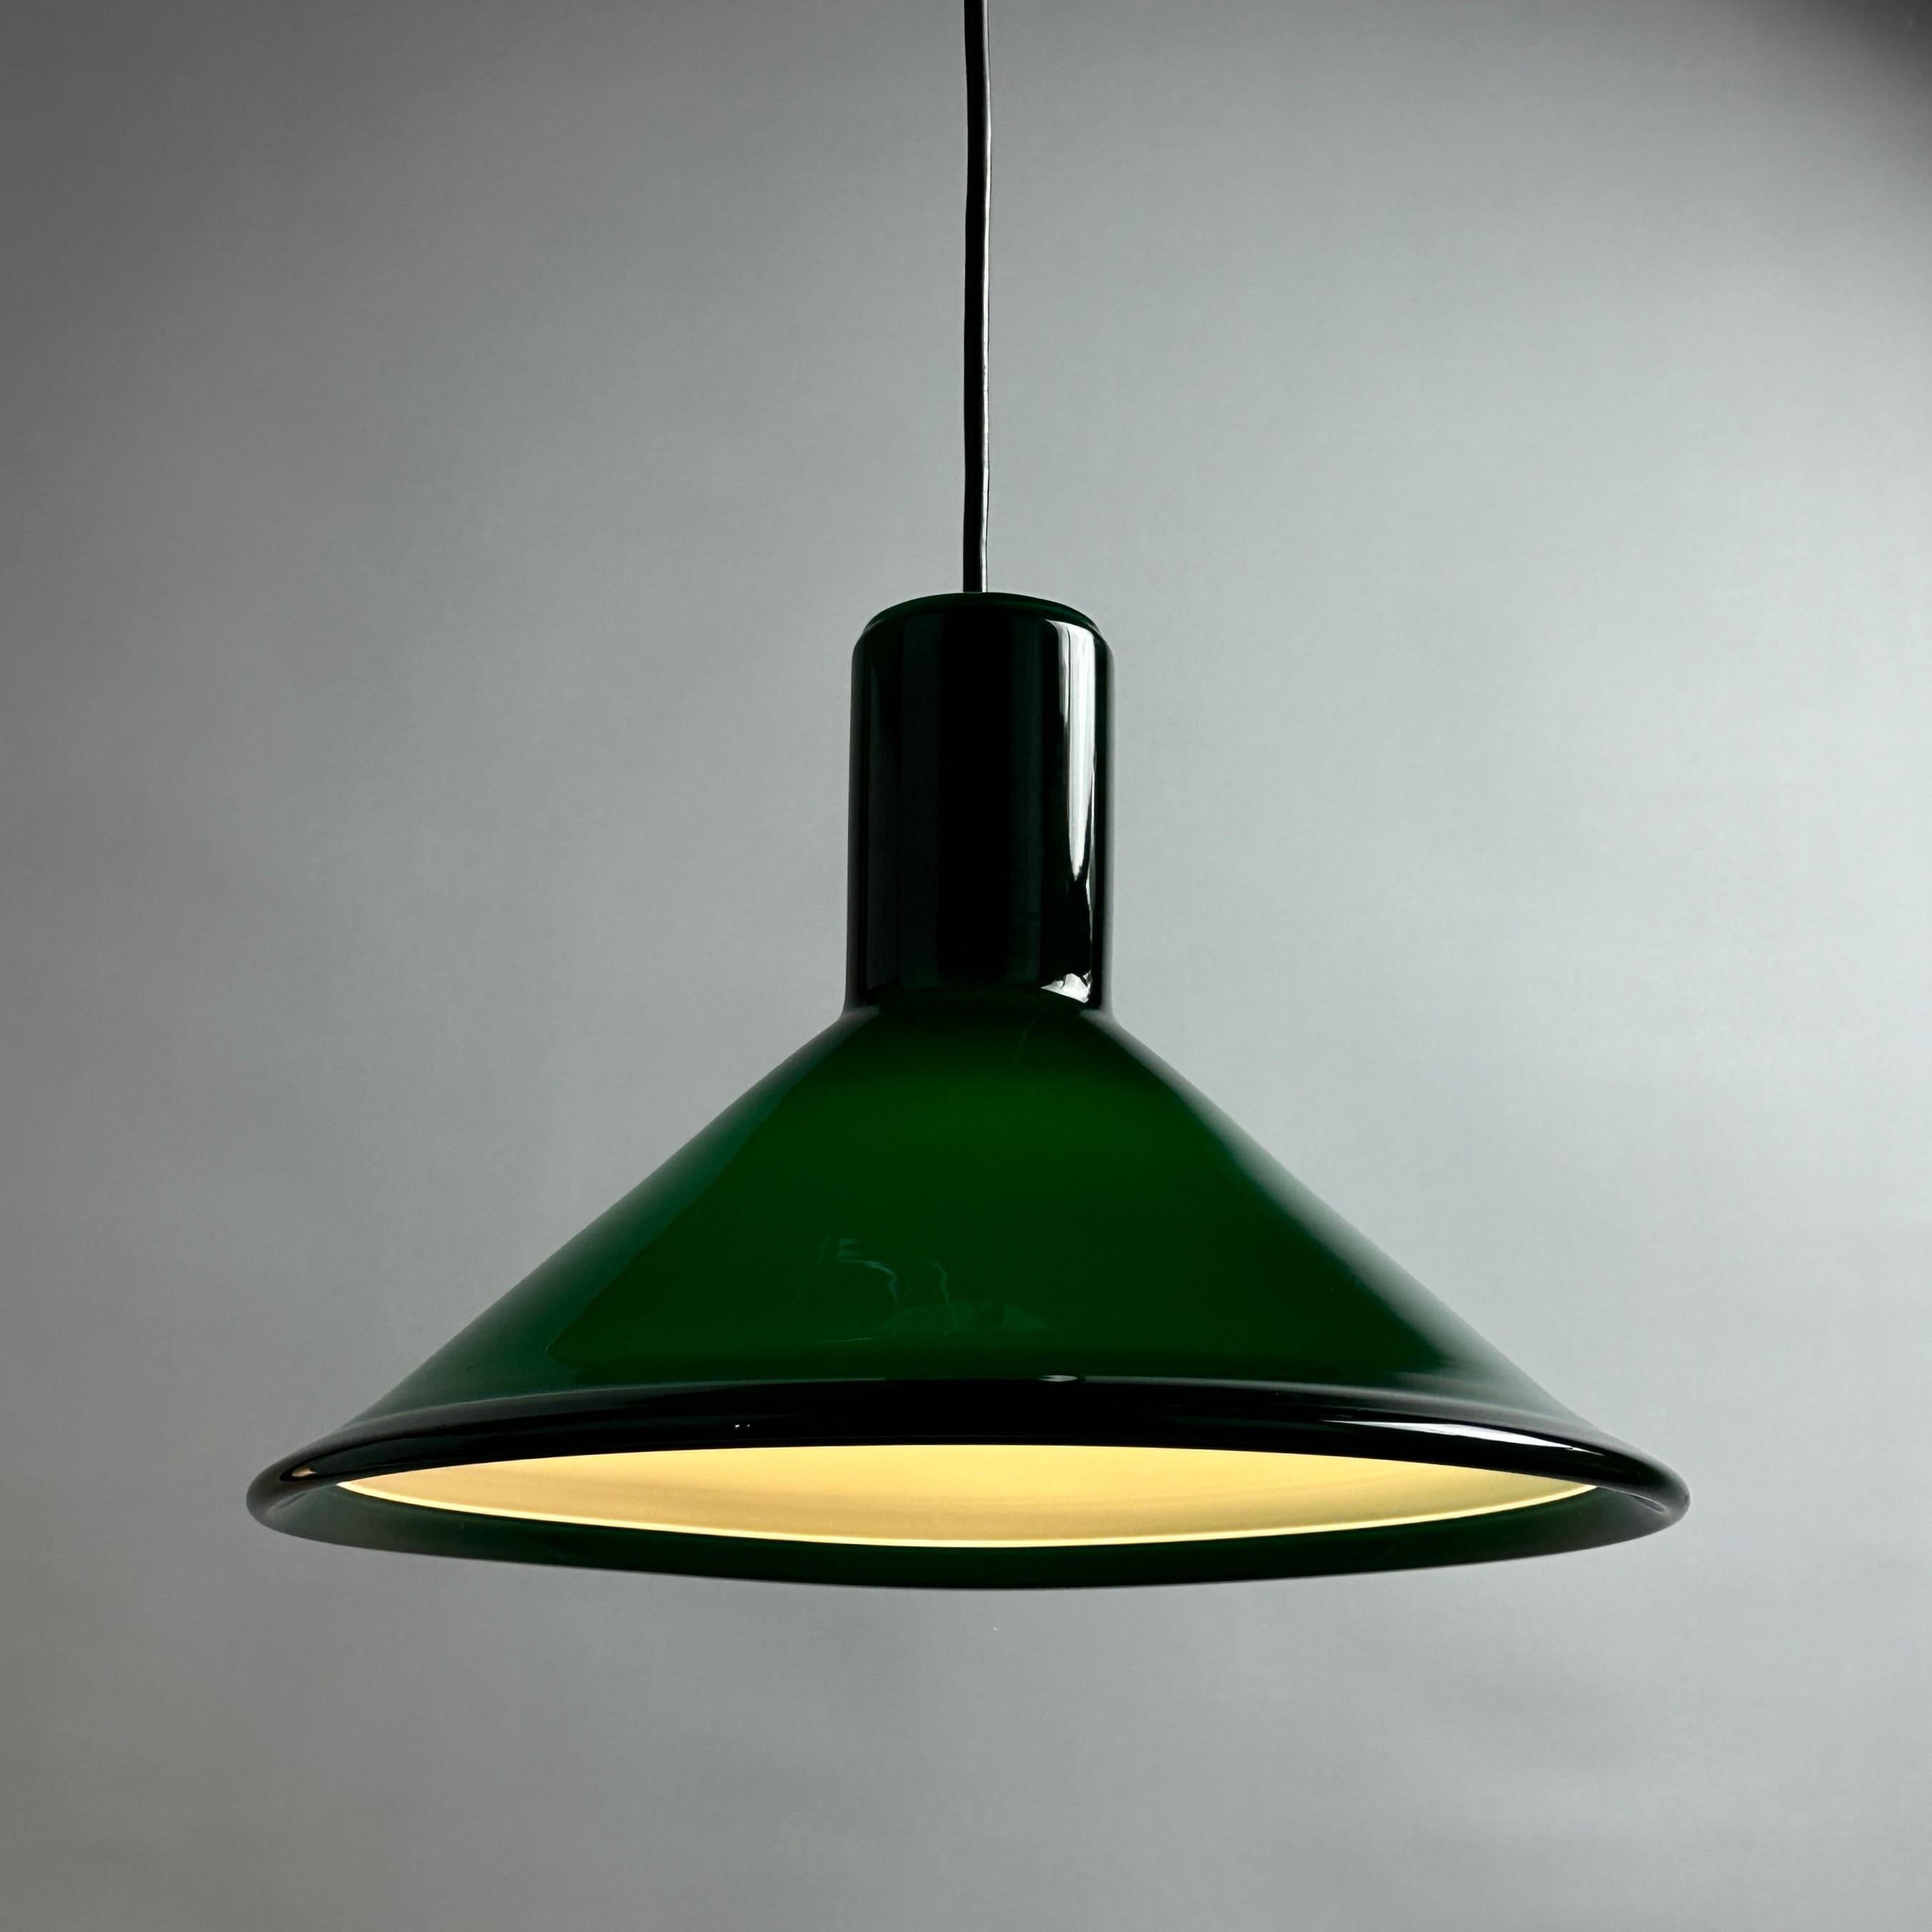 Green Danish glass pendant light Model P & T by Michael Bang for Holmegaard 1972 For Sale 1